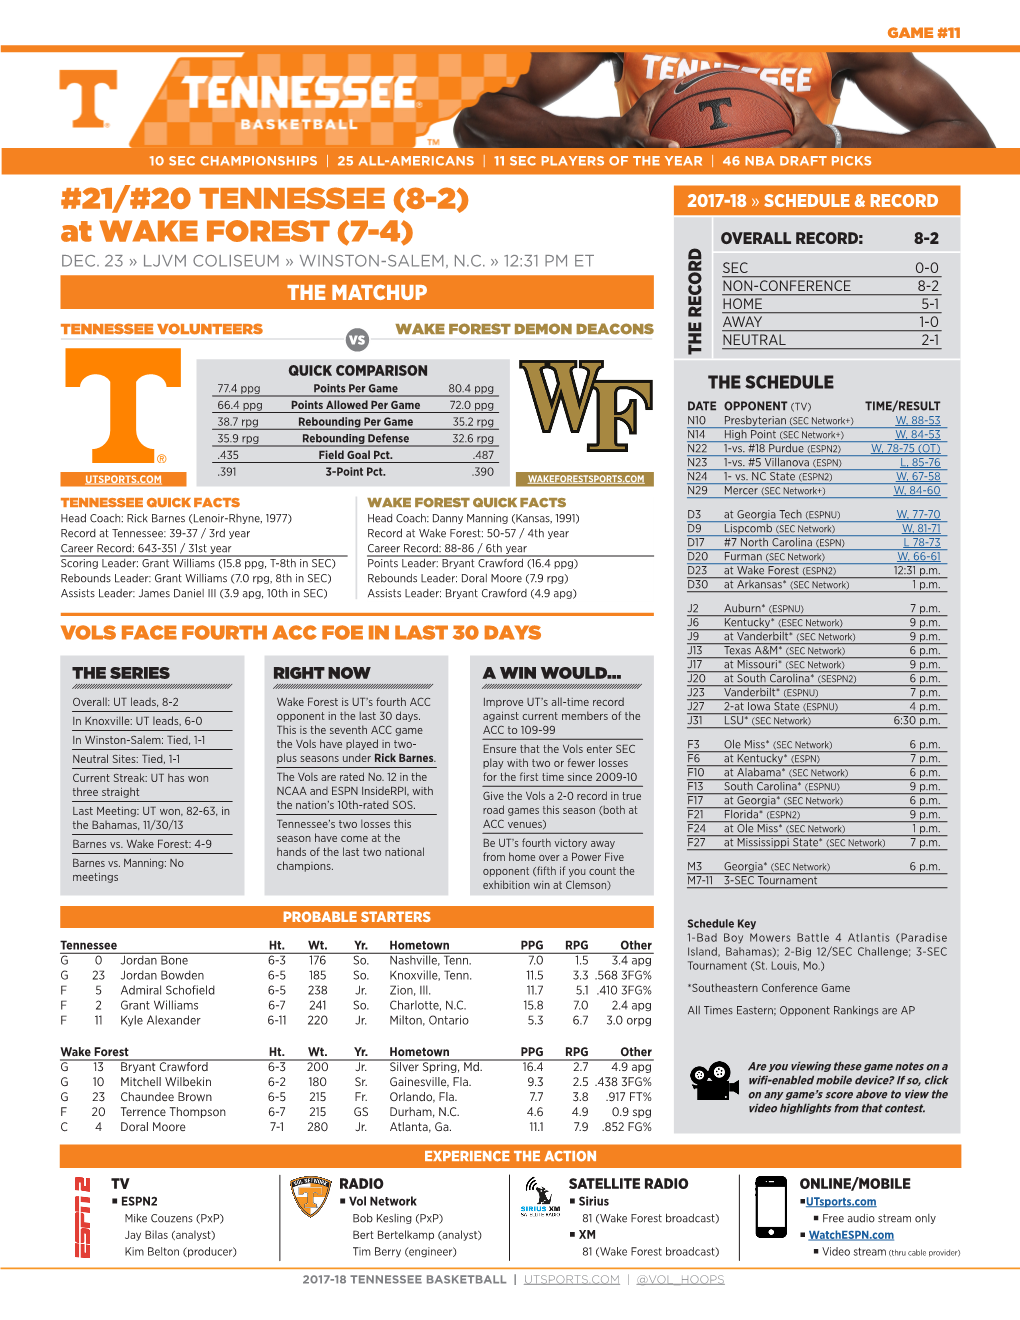 21/#20 TENNESSEE (8-2) at WAKE FOREST (7-4)